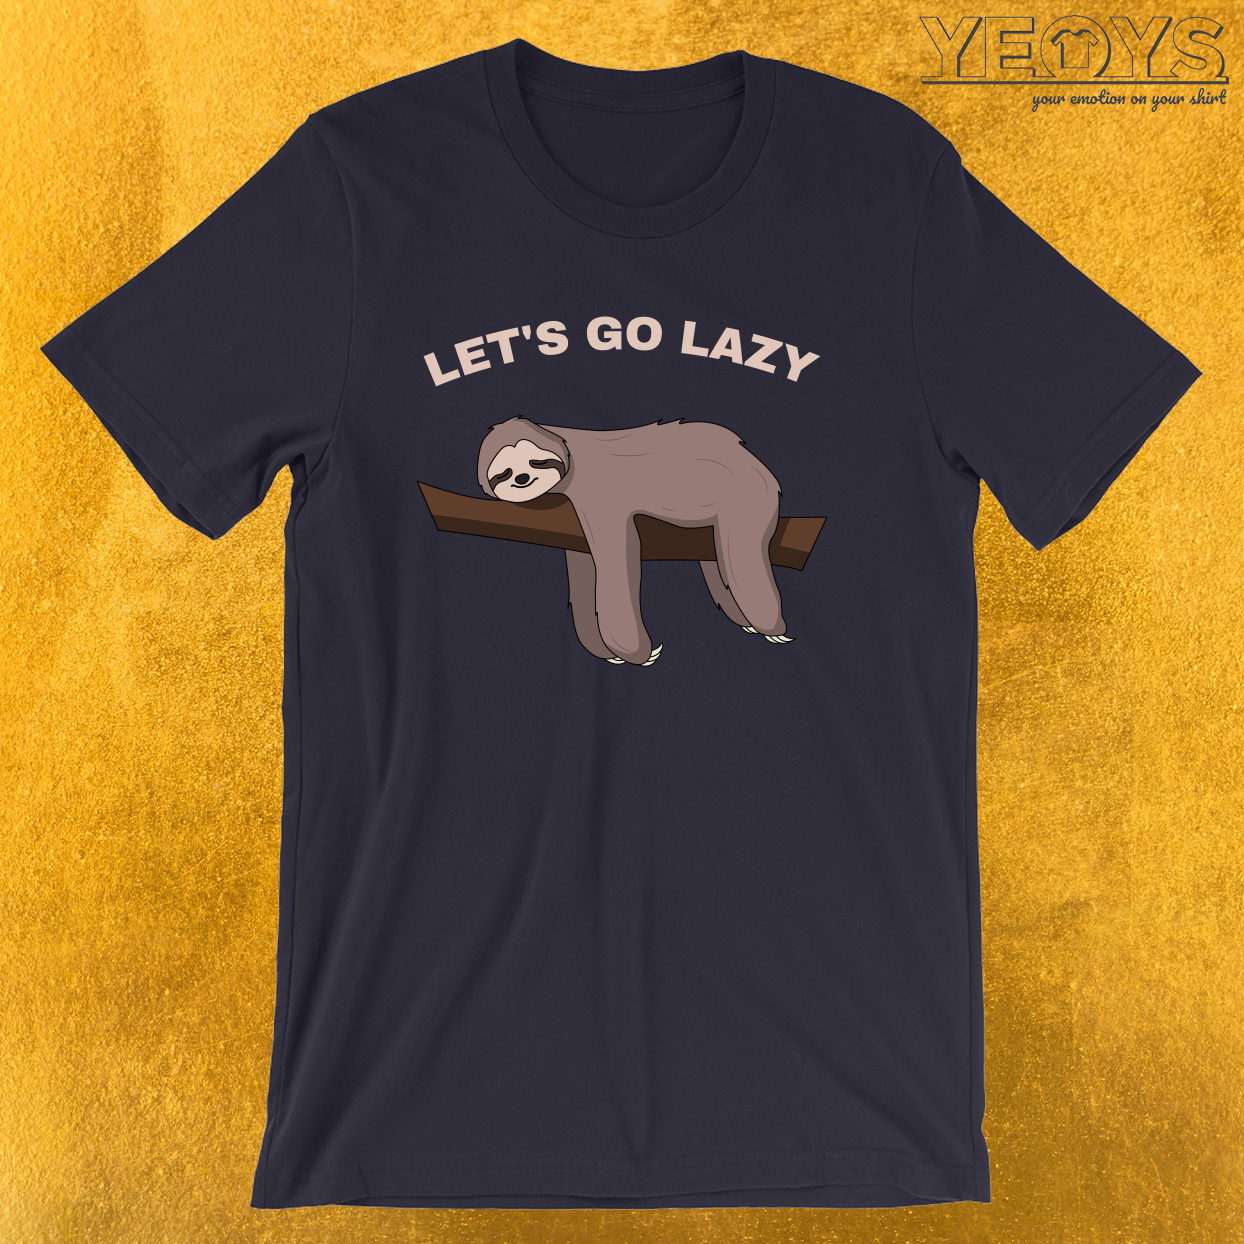 Let’s Go Lazy – Funny Napping Sloth Tee